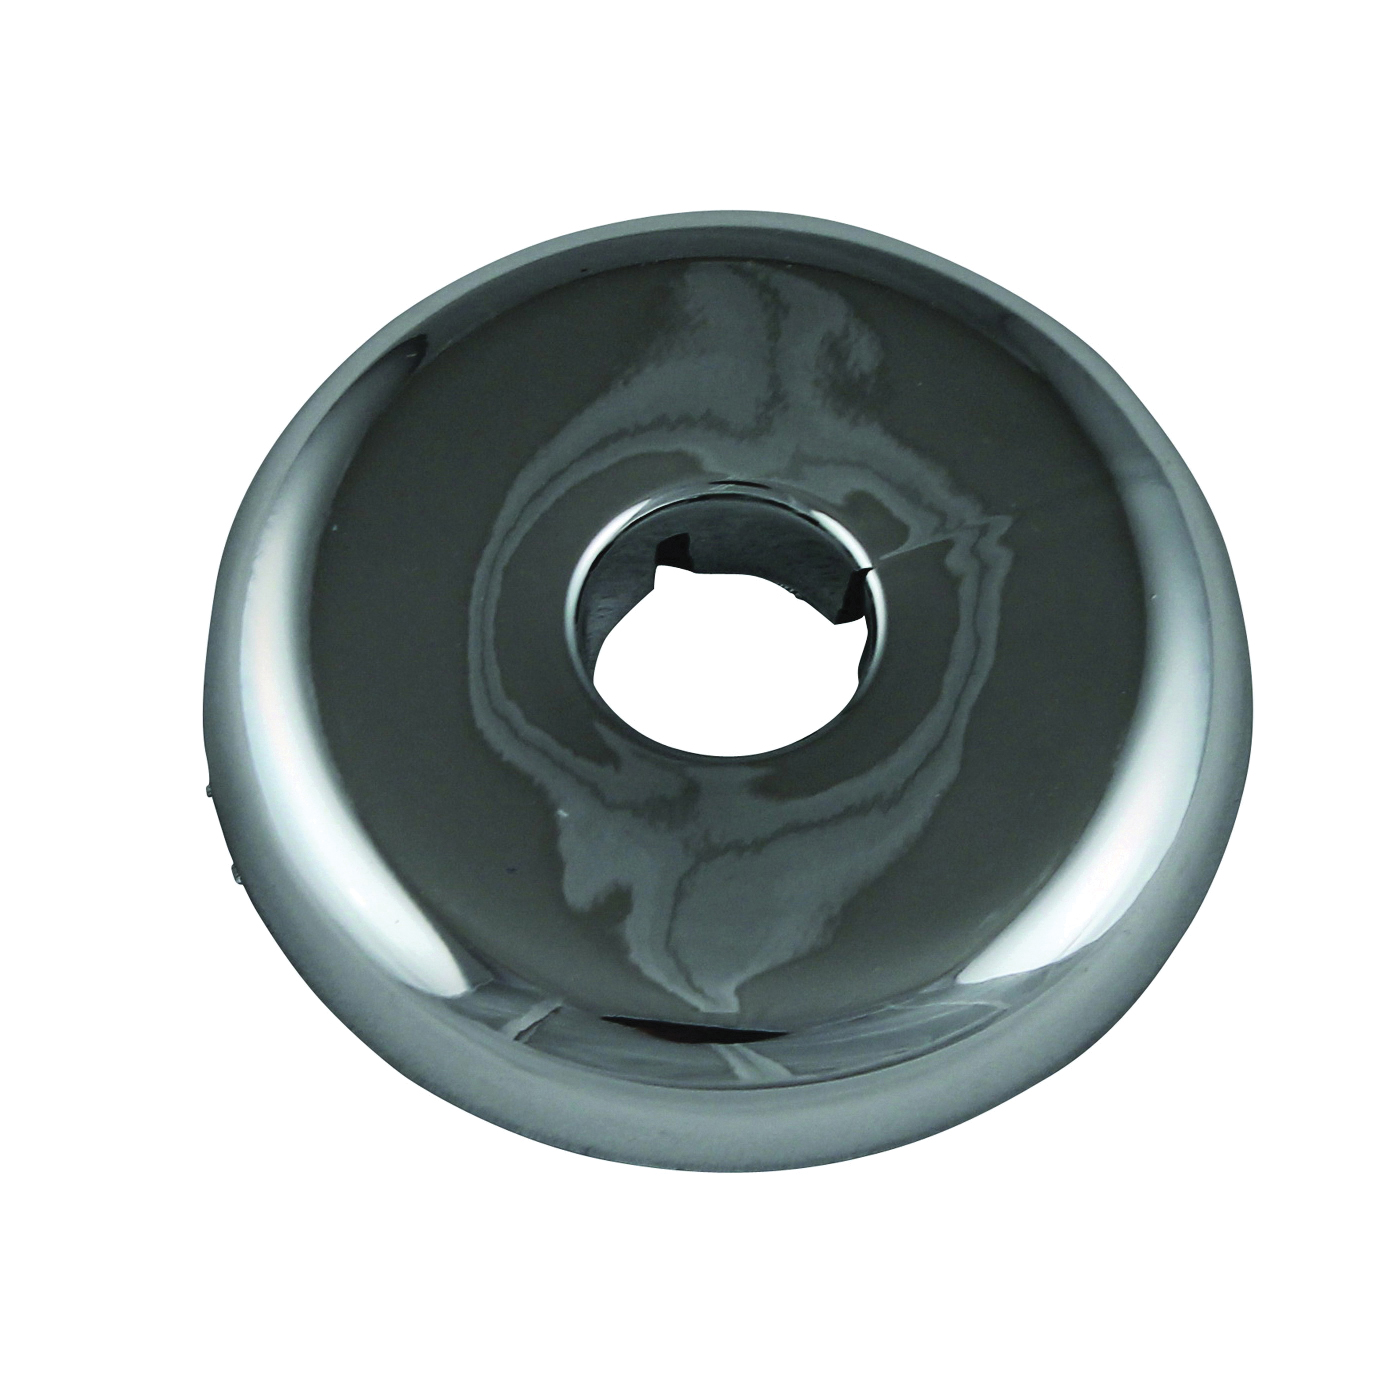 PP101-12 Floor and Ceiling Plate, 3-1/2 in OD, For: 1/2 in Pipes, Plastic, Chrome